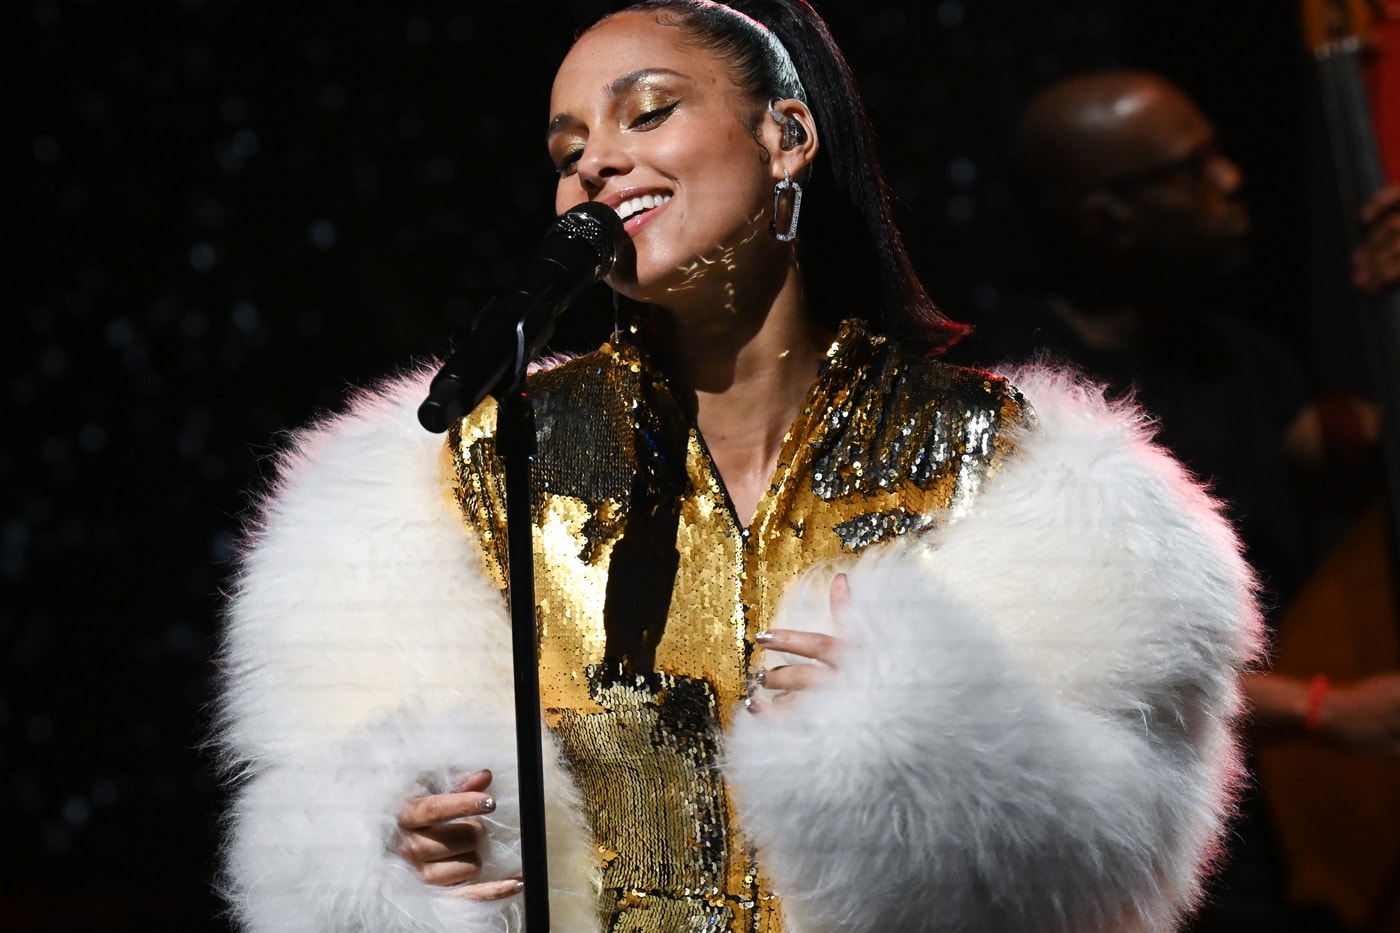 Alicia Keys Keys To The Summer Tour north america 2023 Dates announcement